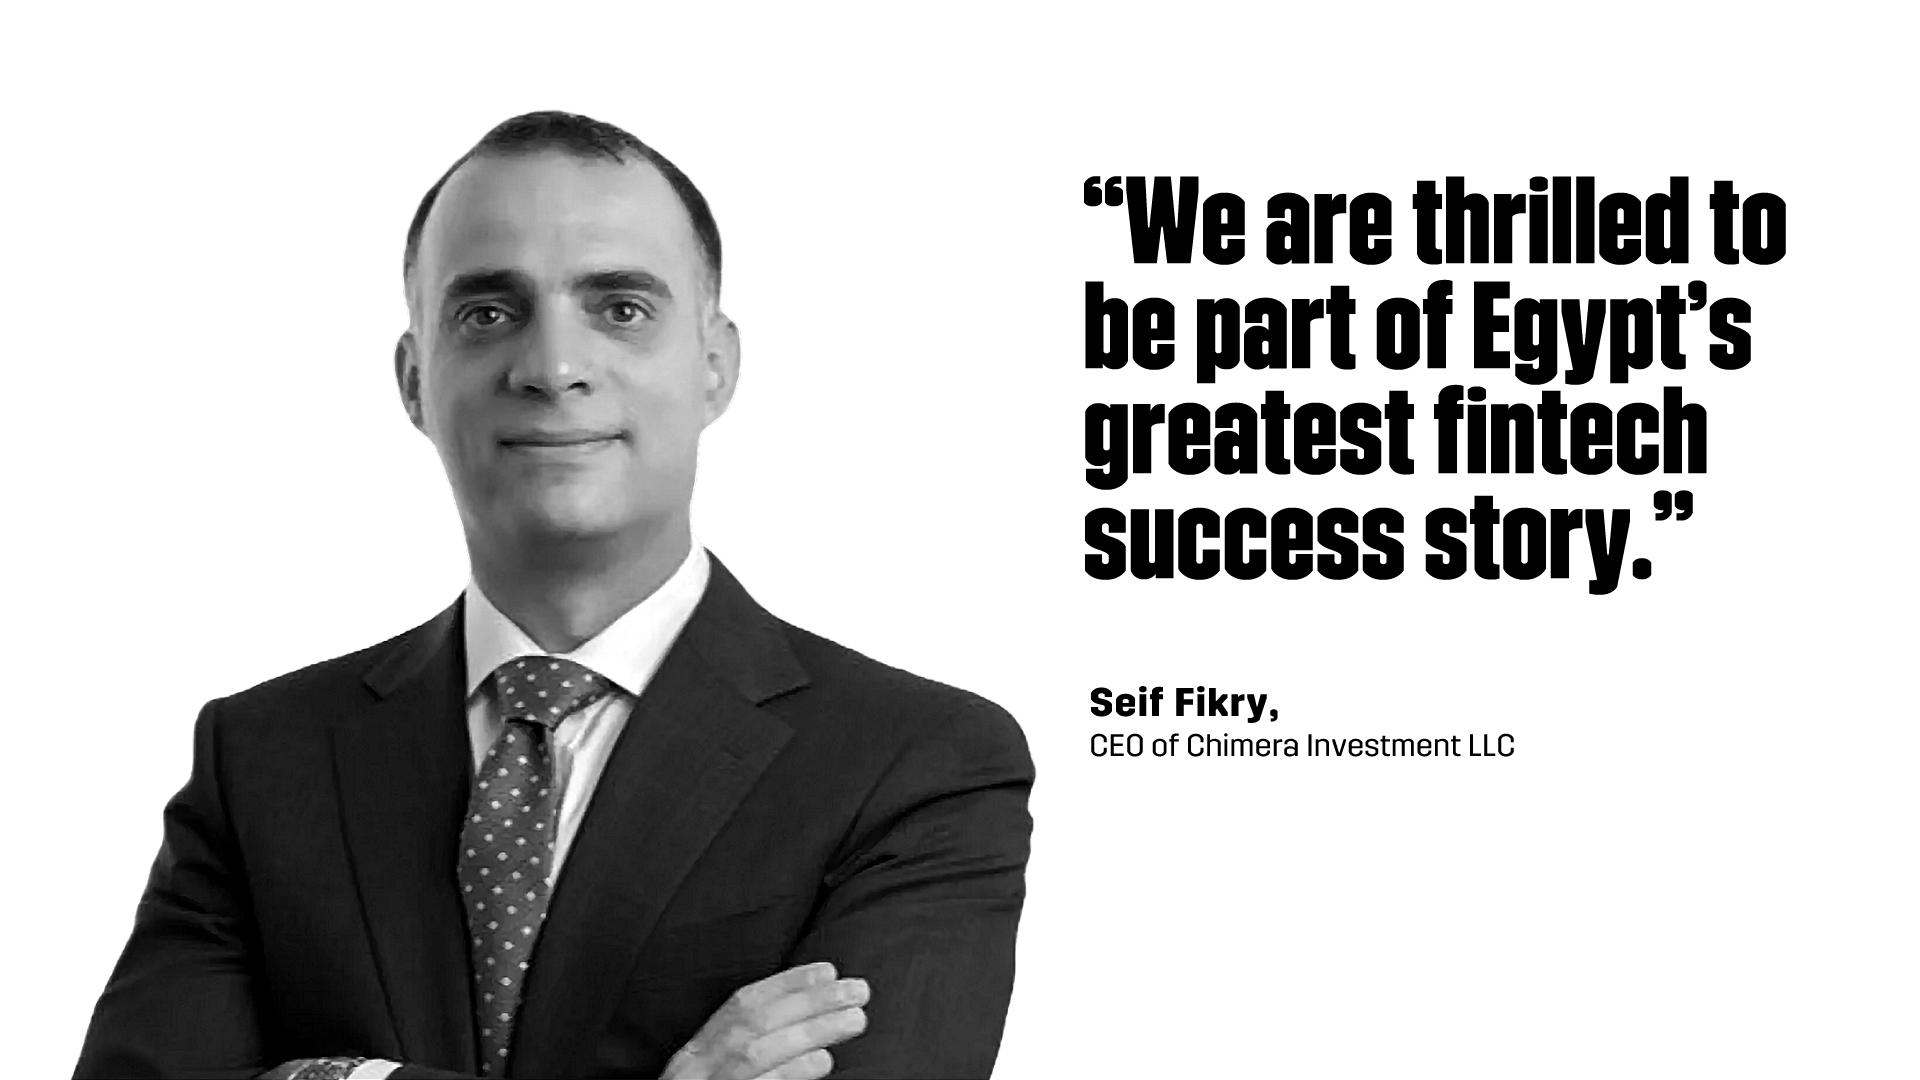 “We are thrilled to be part of Egypt’s greatest fintech success story.” Seif Fikry, CEO of Chimera Investment LLC